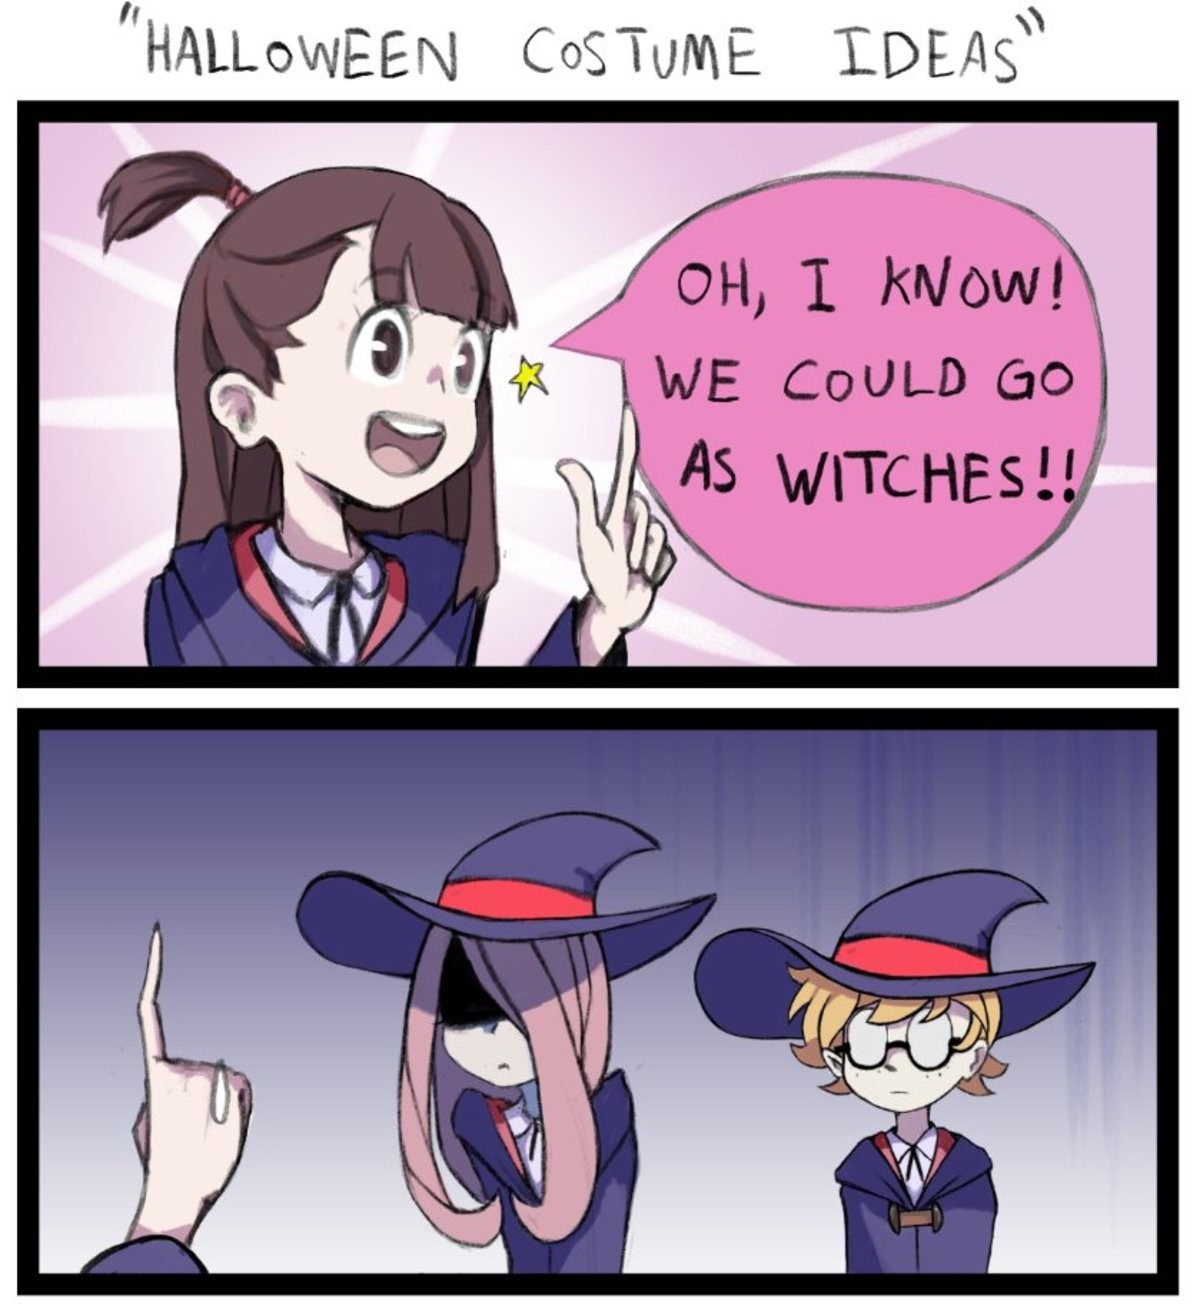 Little Witch Academia #2